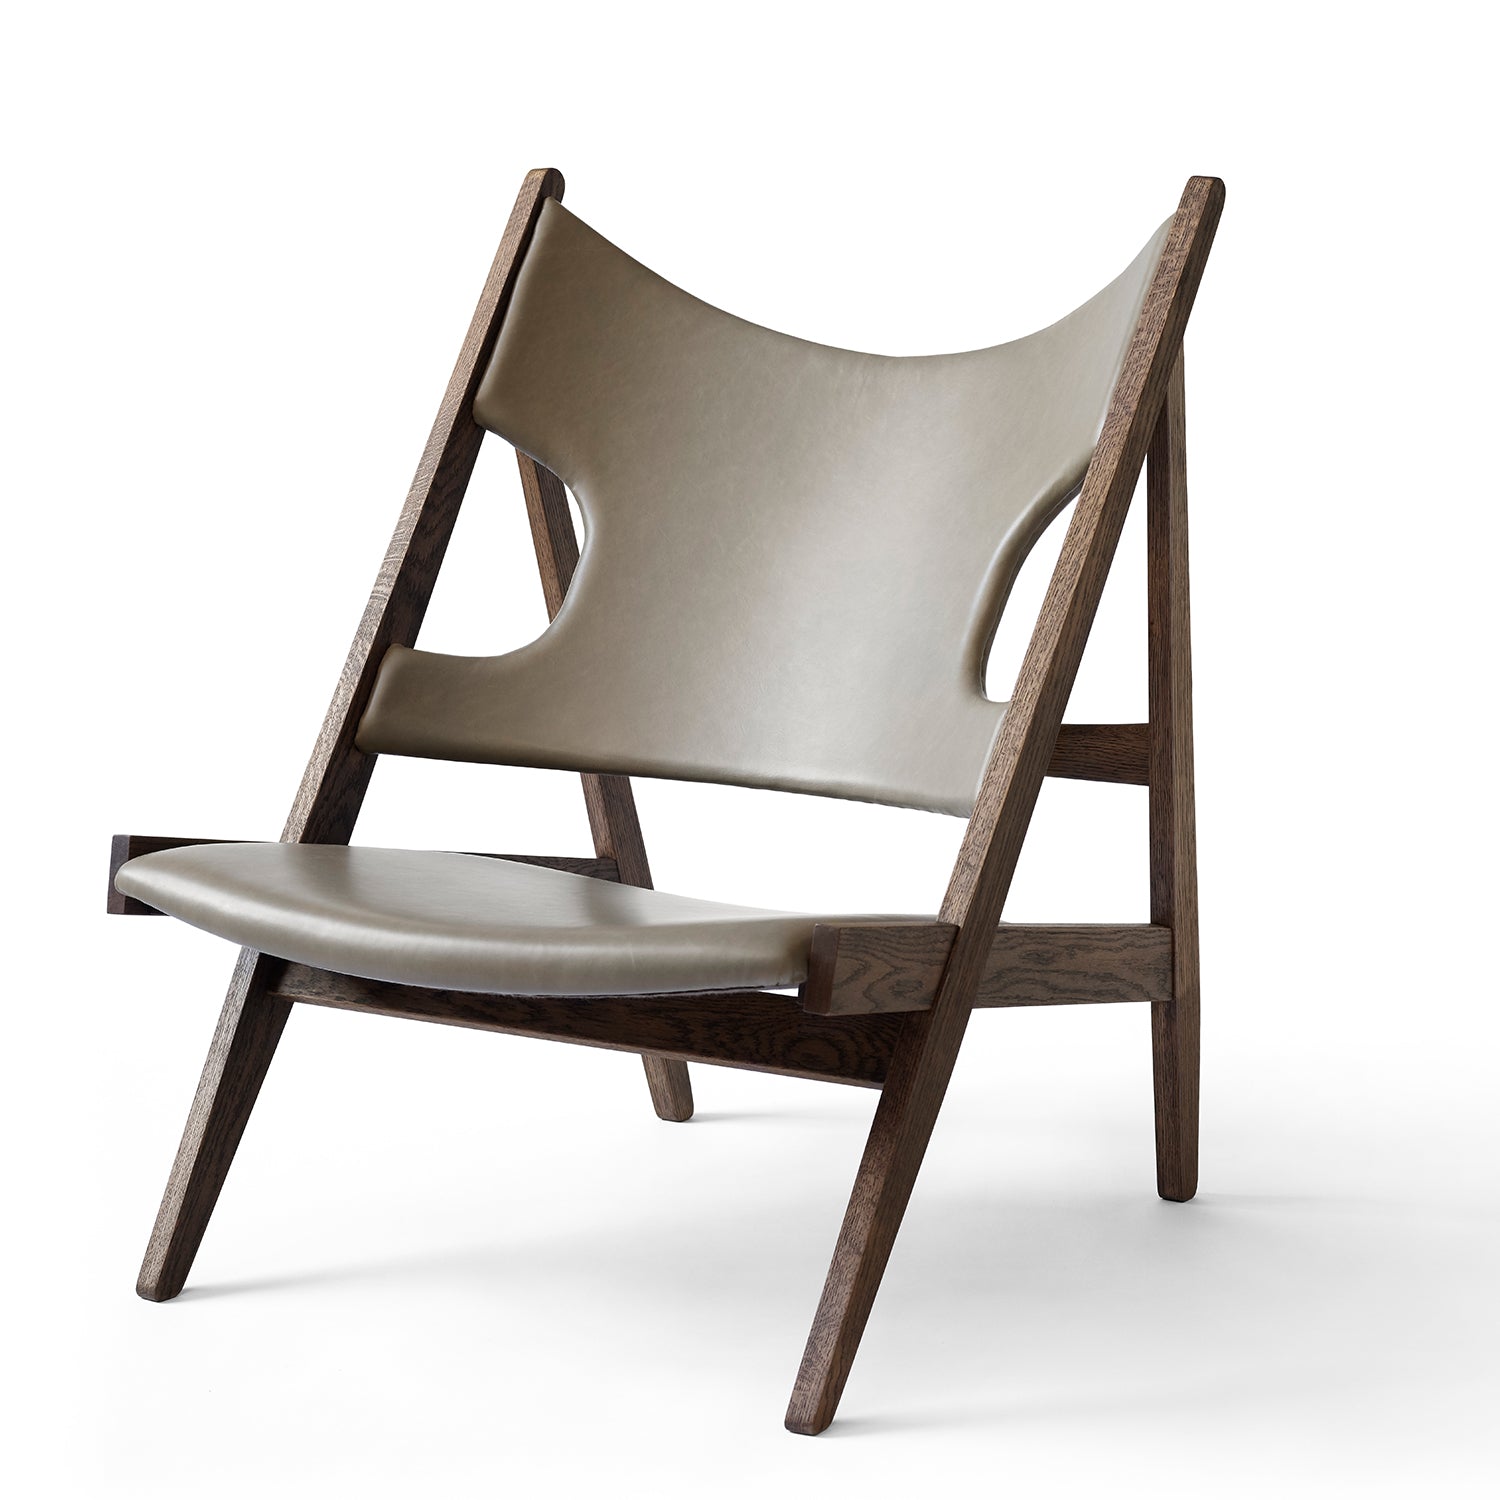 Knitting Lounge Chair - The Design Choice